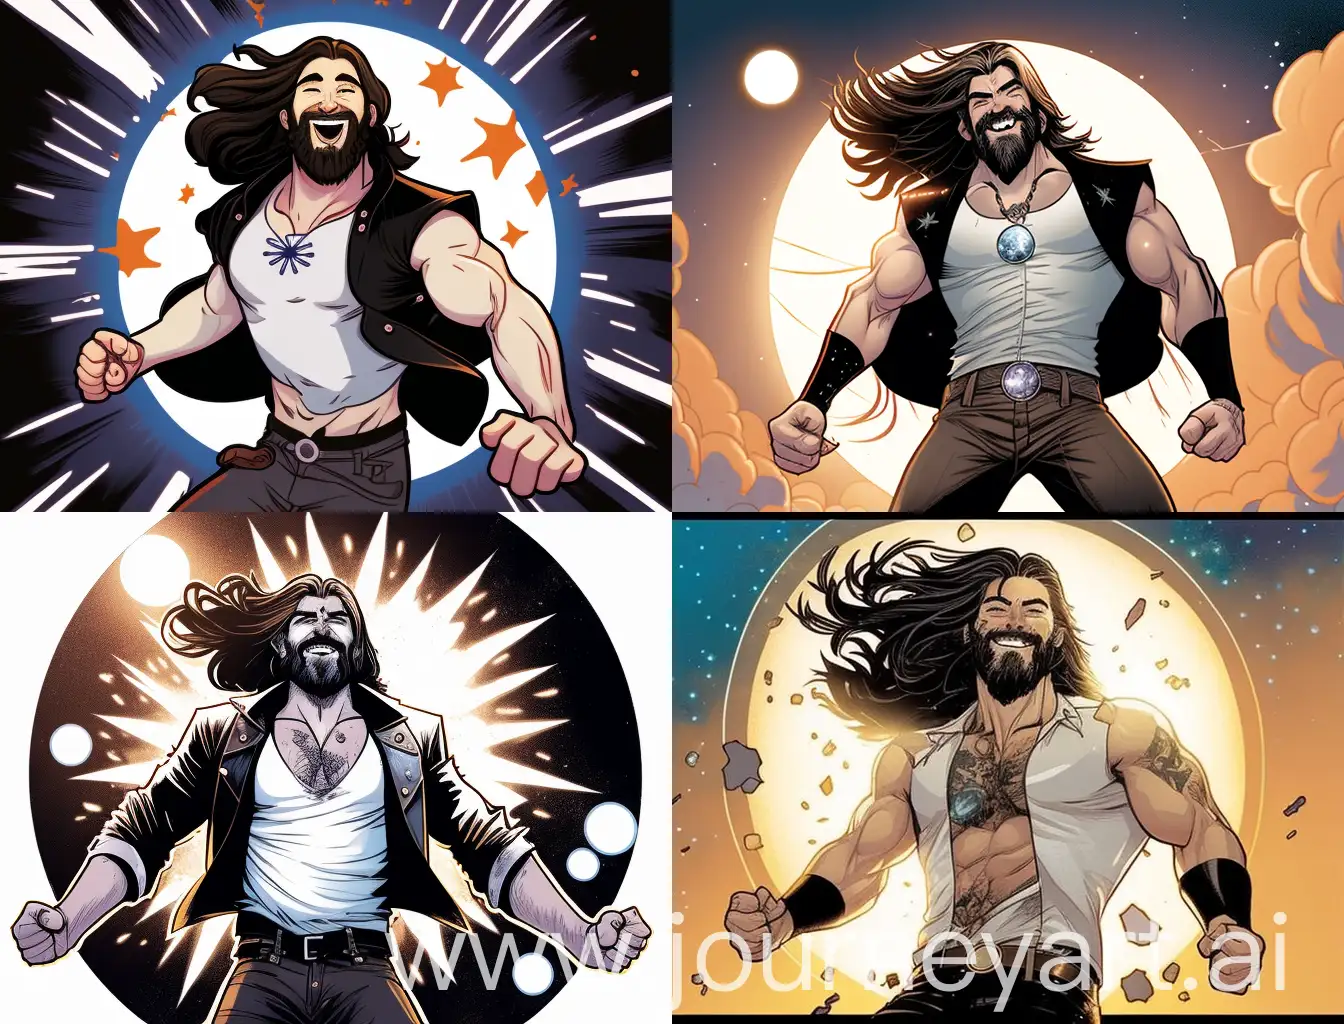 Muscular-Man-Flying-Over-Comet-Shower-in-Marvel-Comics-Style